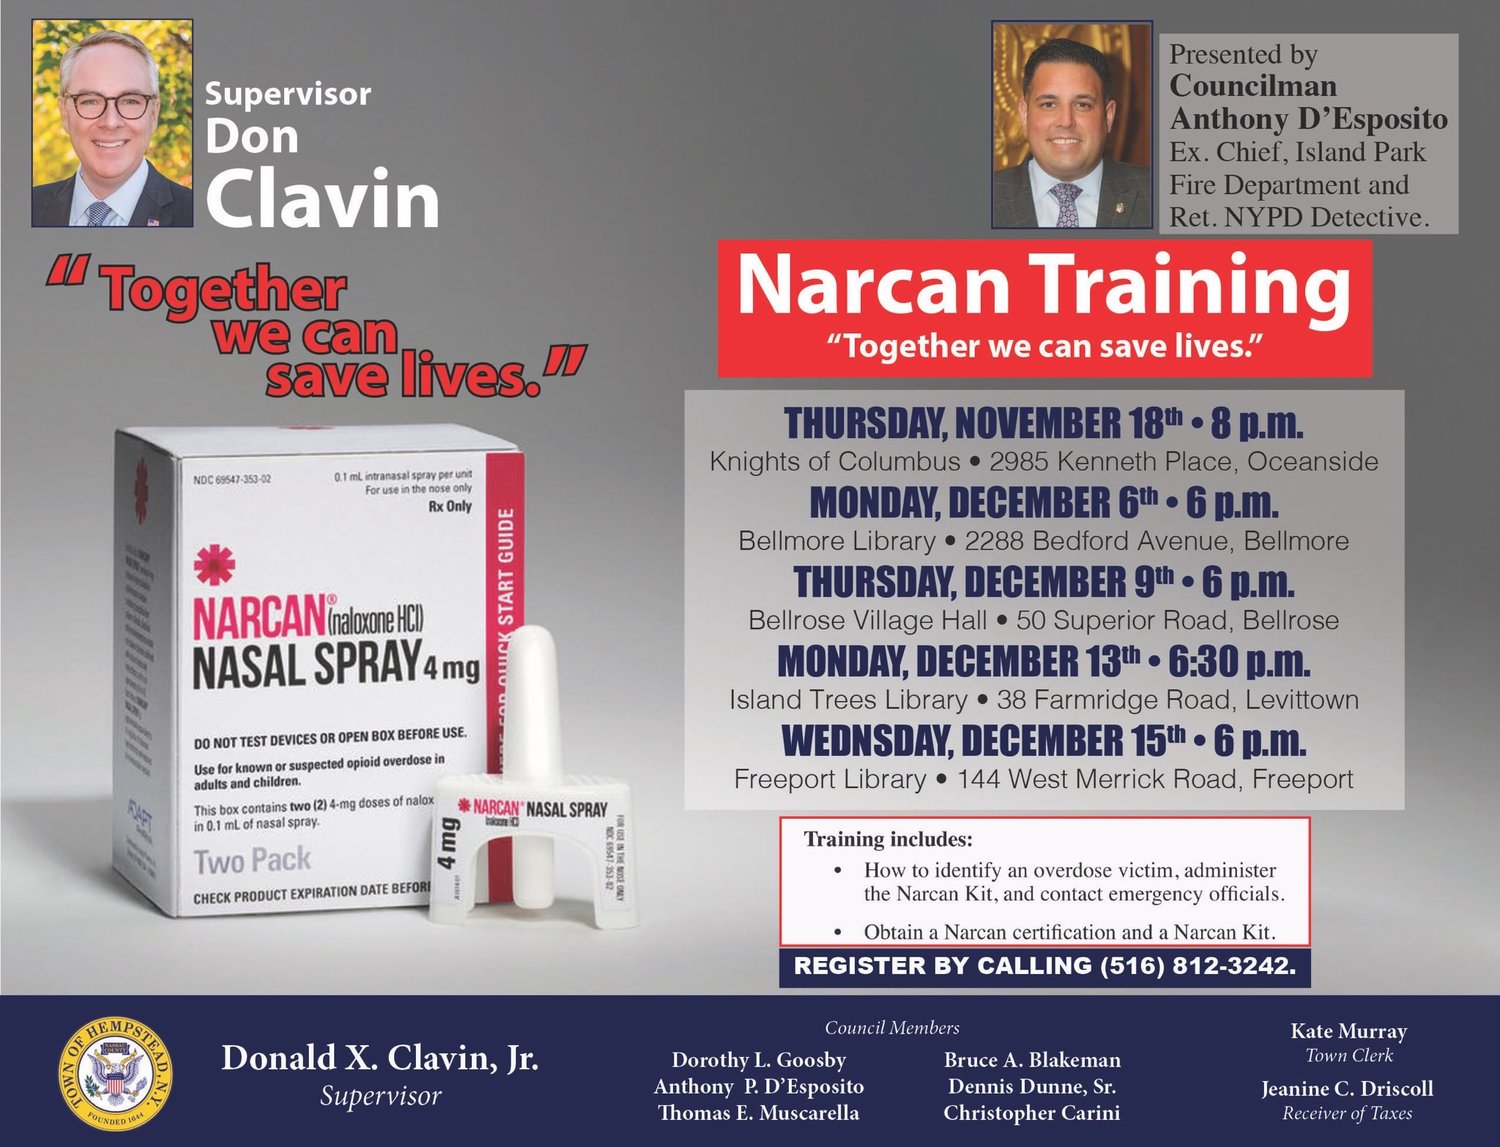 Hempstead Town Councilman Anthony D’Esposito will present four Narcan training sessions this month.